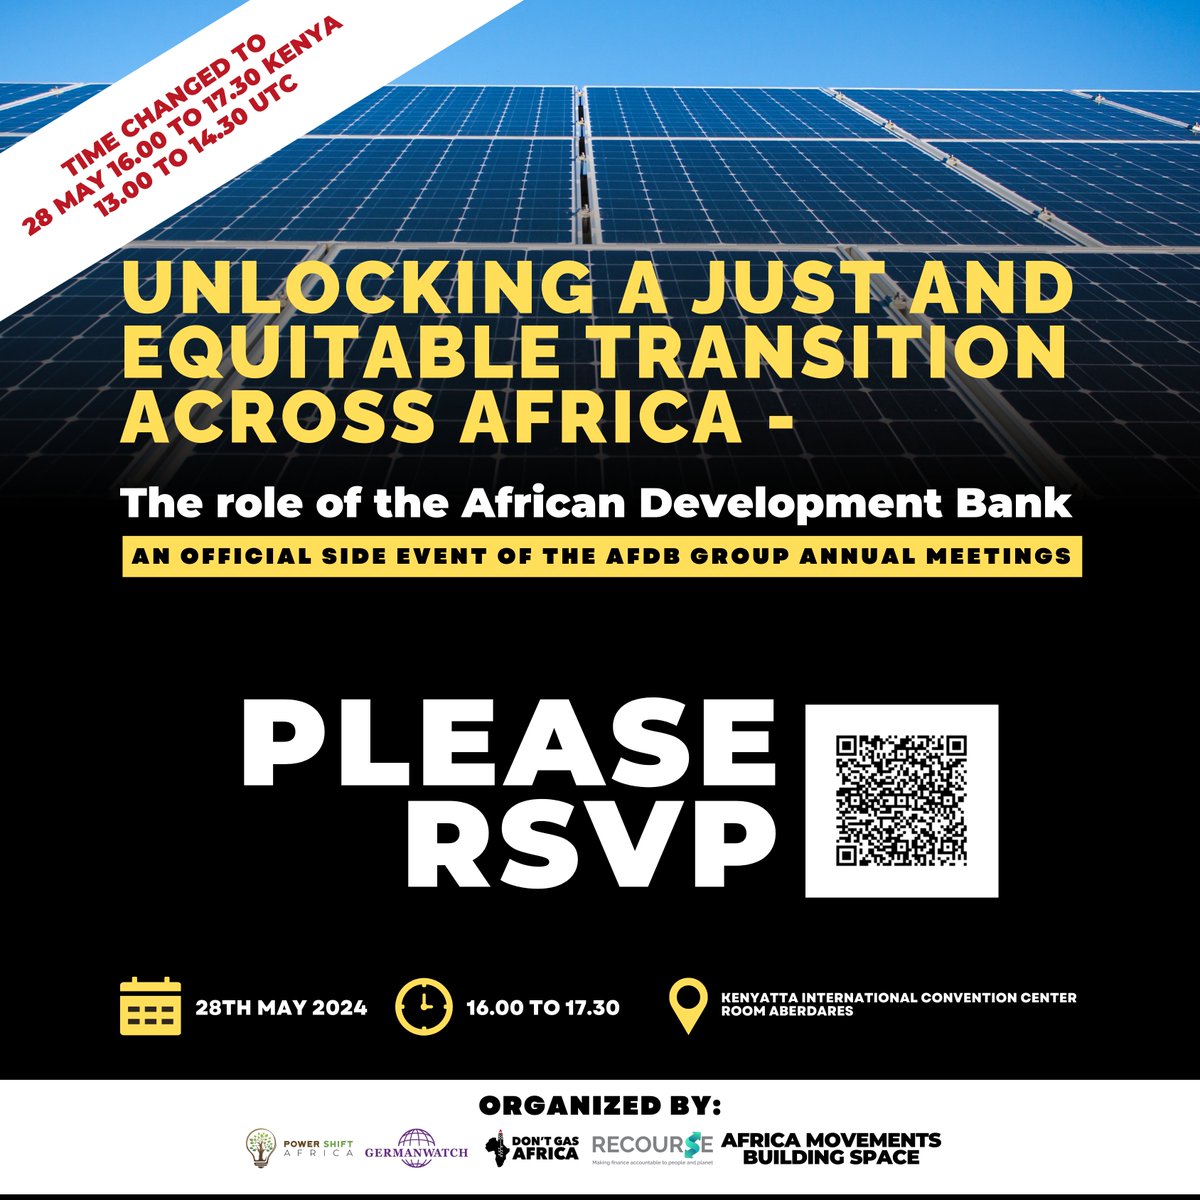 NEW TIME panel discussion at @AfDB_Group AM 28 May: 4pm - 5.30pm Kenya/1pm - 2.30pm UTC: 💭What is the role of the AfDB in unlocking a just & equitable transition across Africa? Sign up to join in person or to receive a virtual link bit.ly/4azrwLV #TheAfricaWeWant